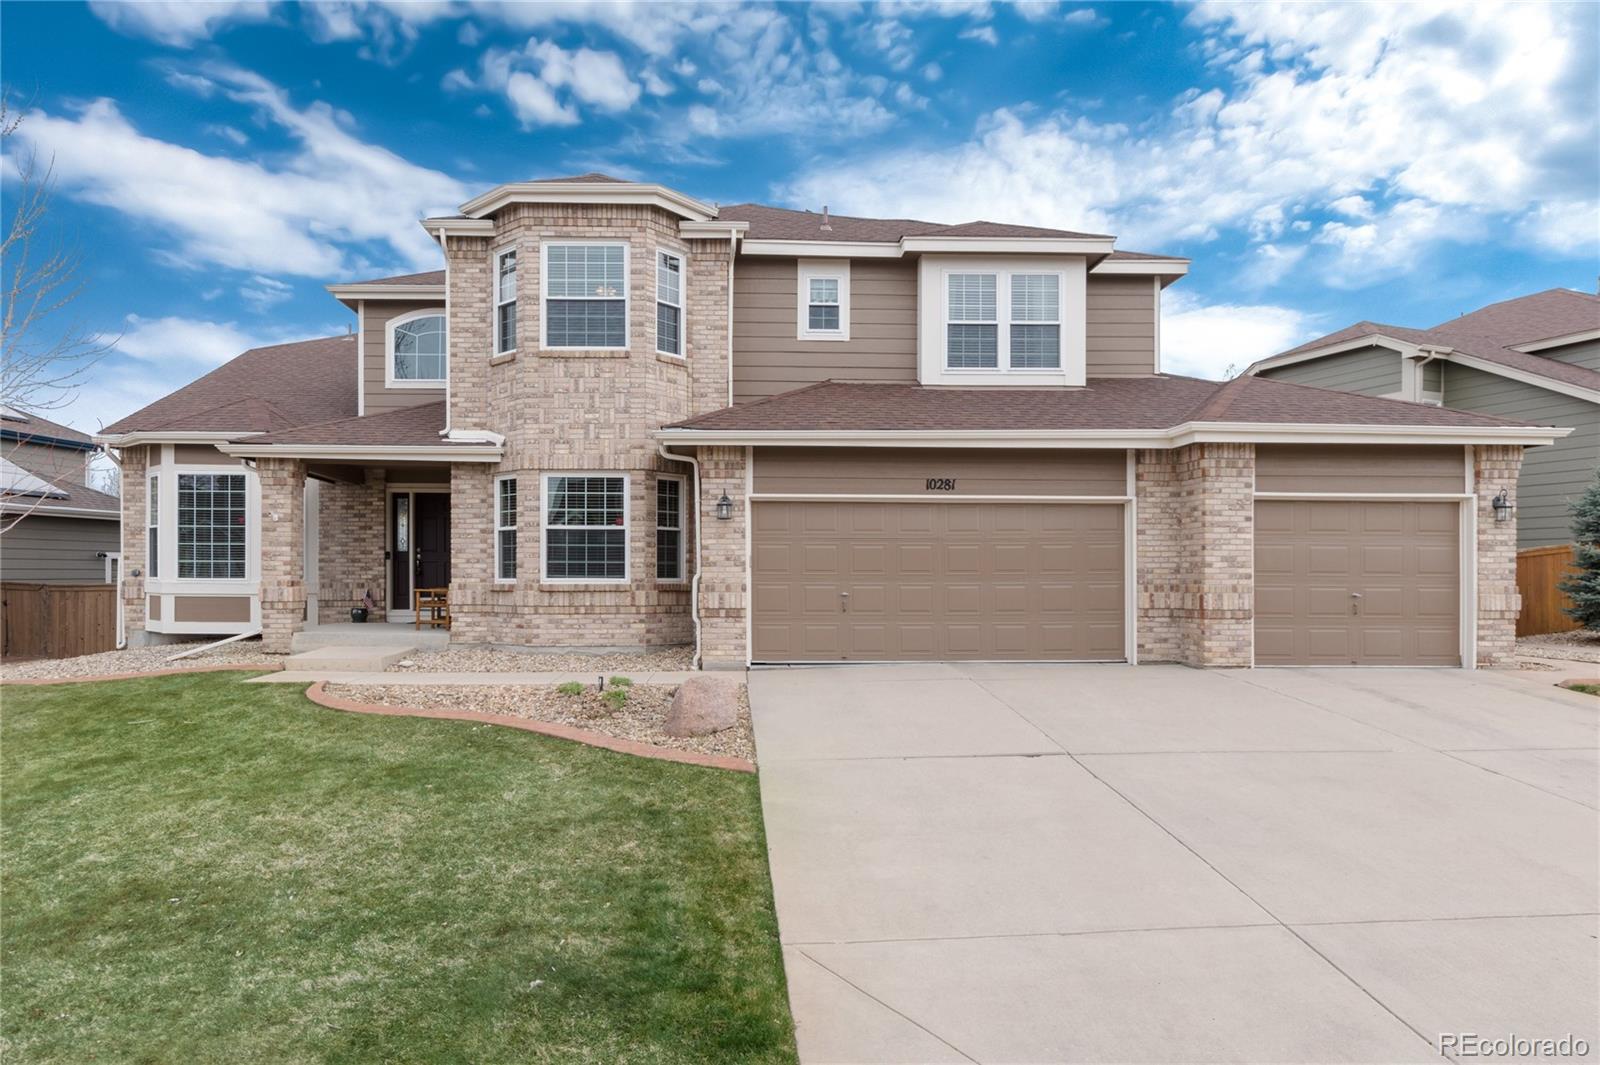 10281  knoll circle, highlands ranch sold home. Closed on 2024-05-07 for $985,000.